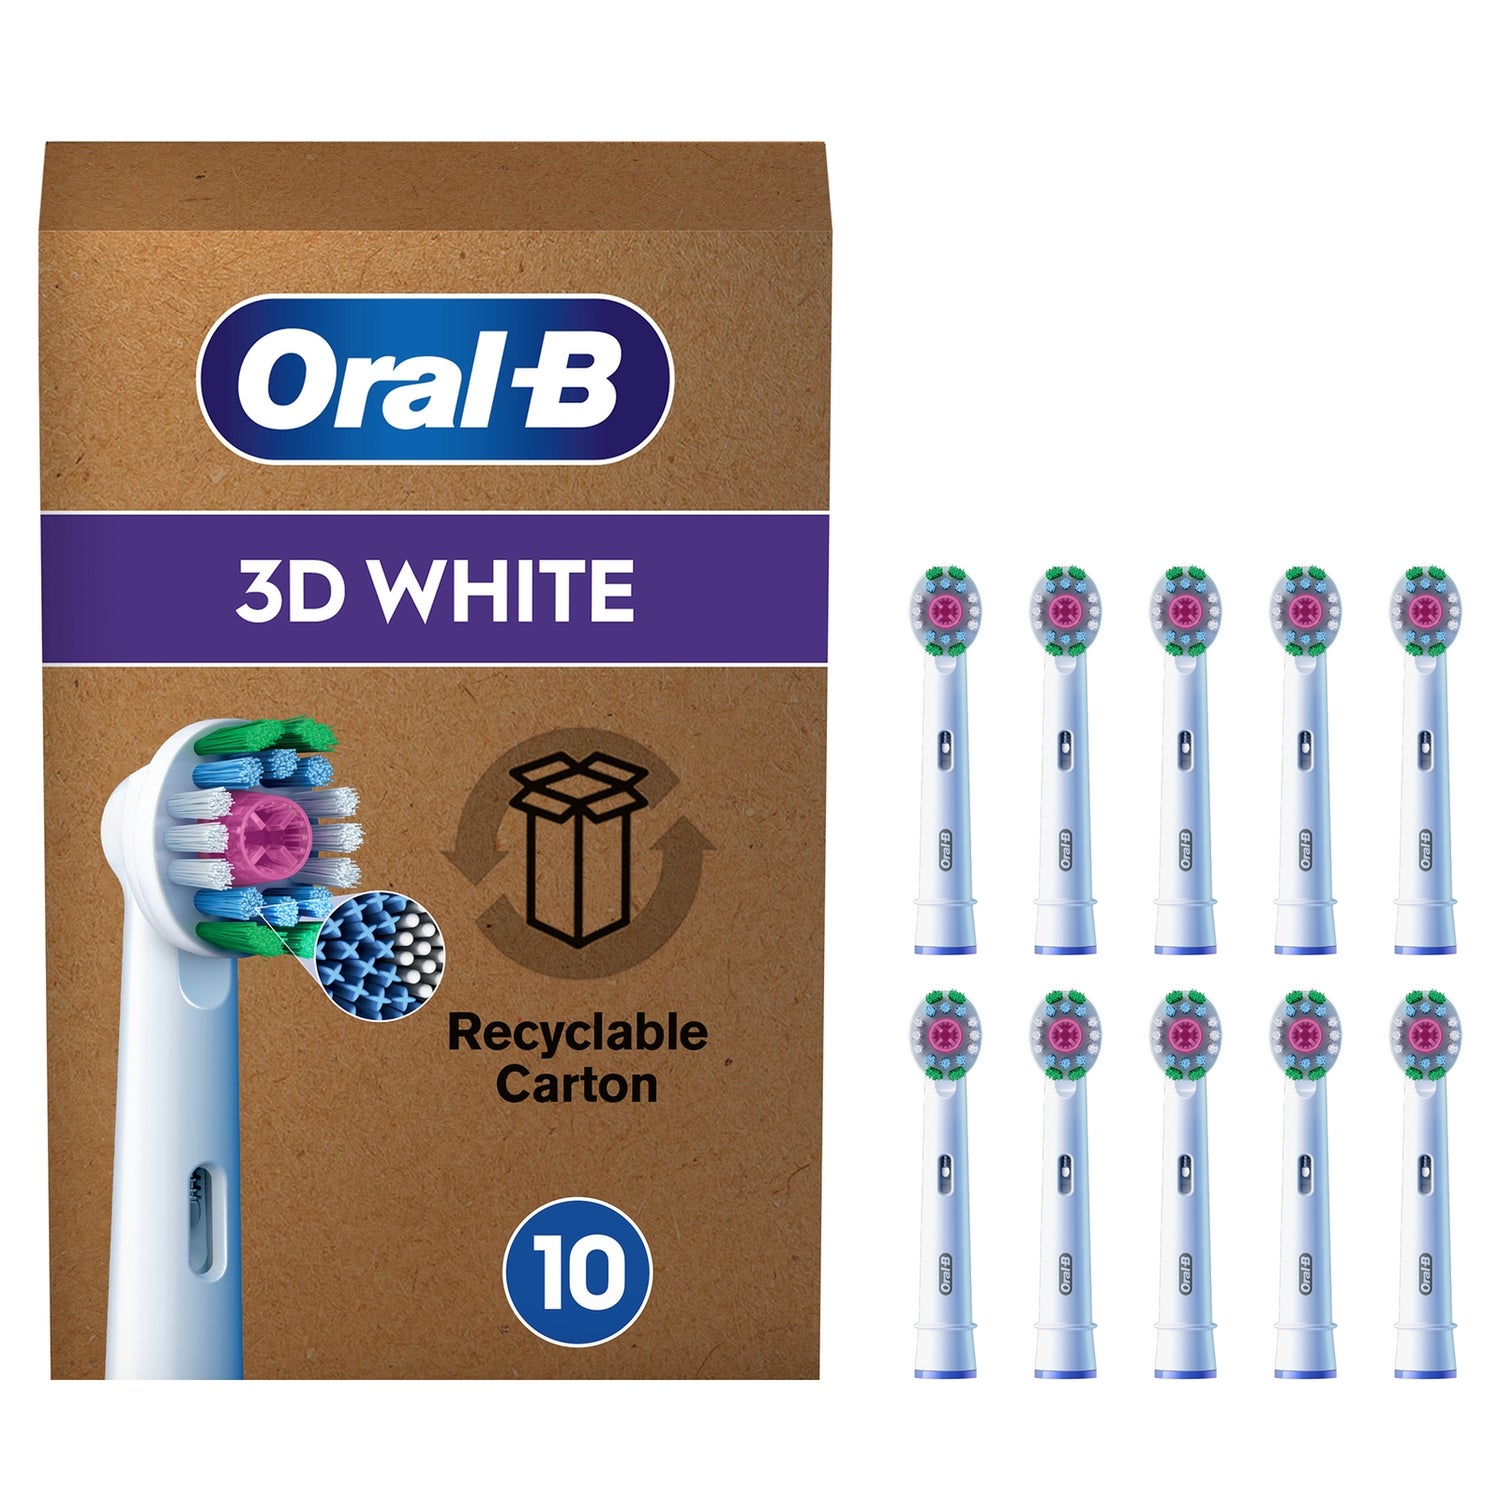 Oral B 3D White Toothbrush Head - Pack of 10 Counts